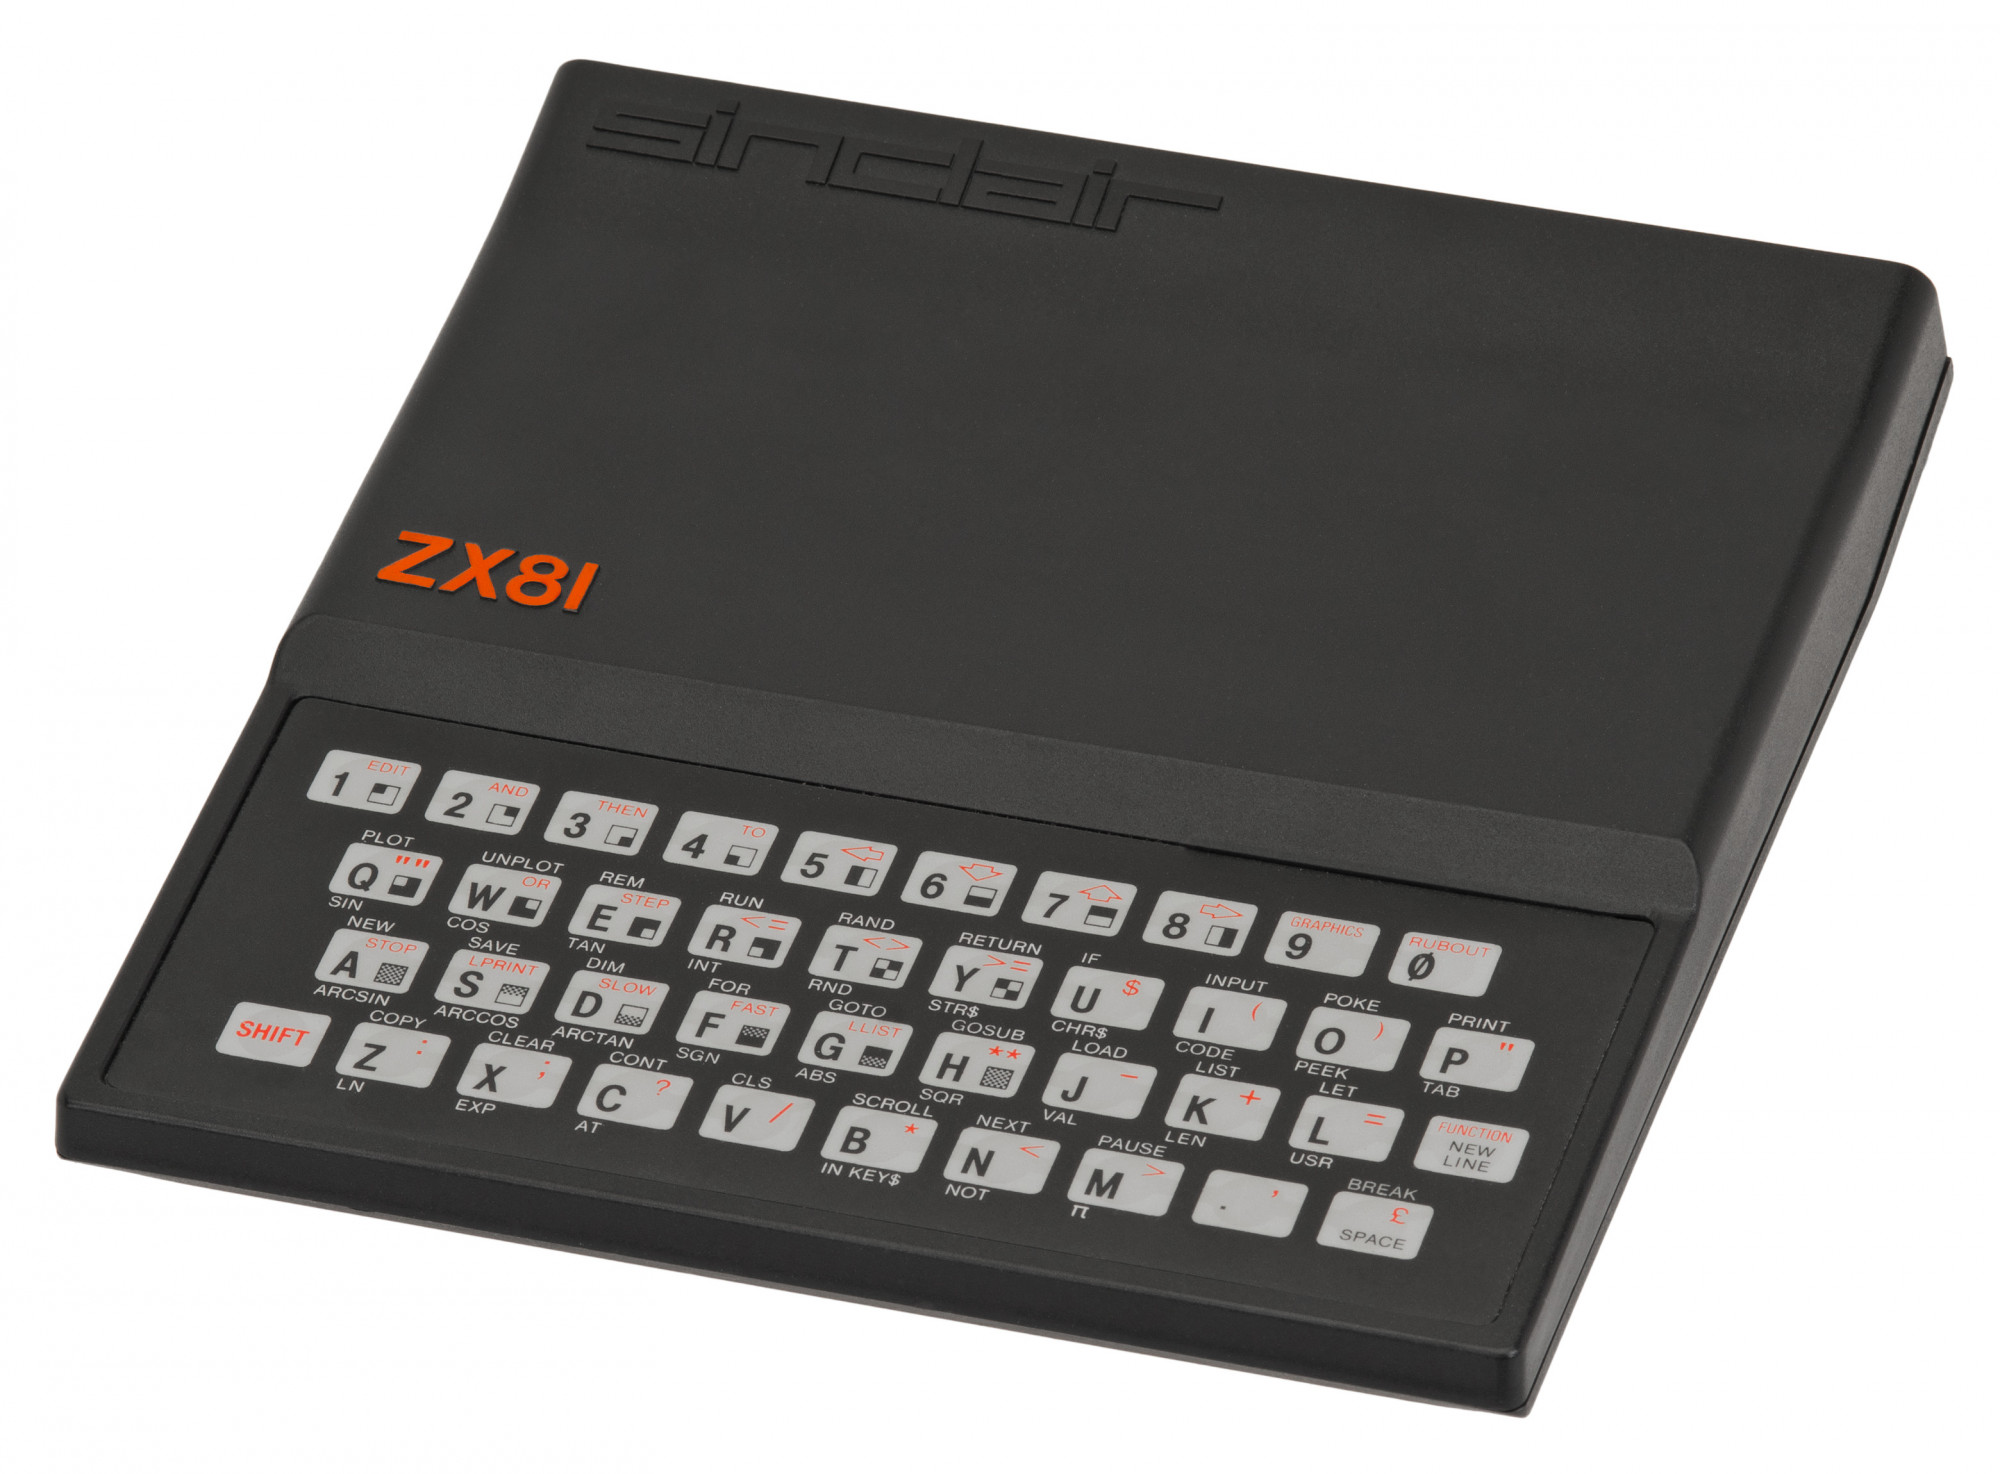 A Sinclair ZX81, Rick Dickinson formaterve